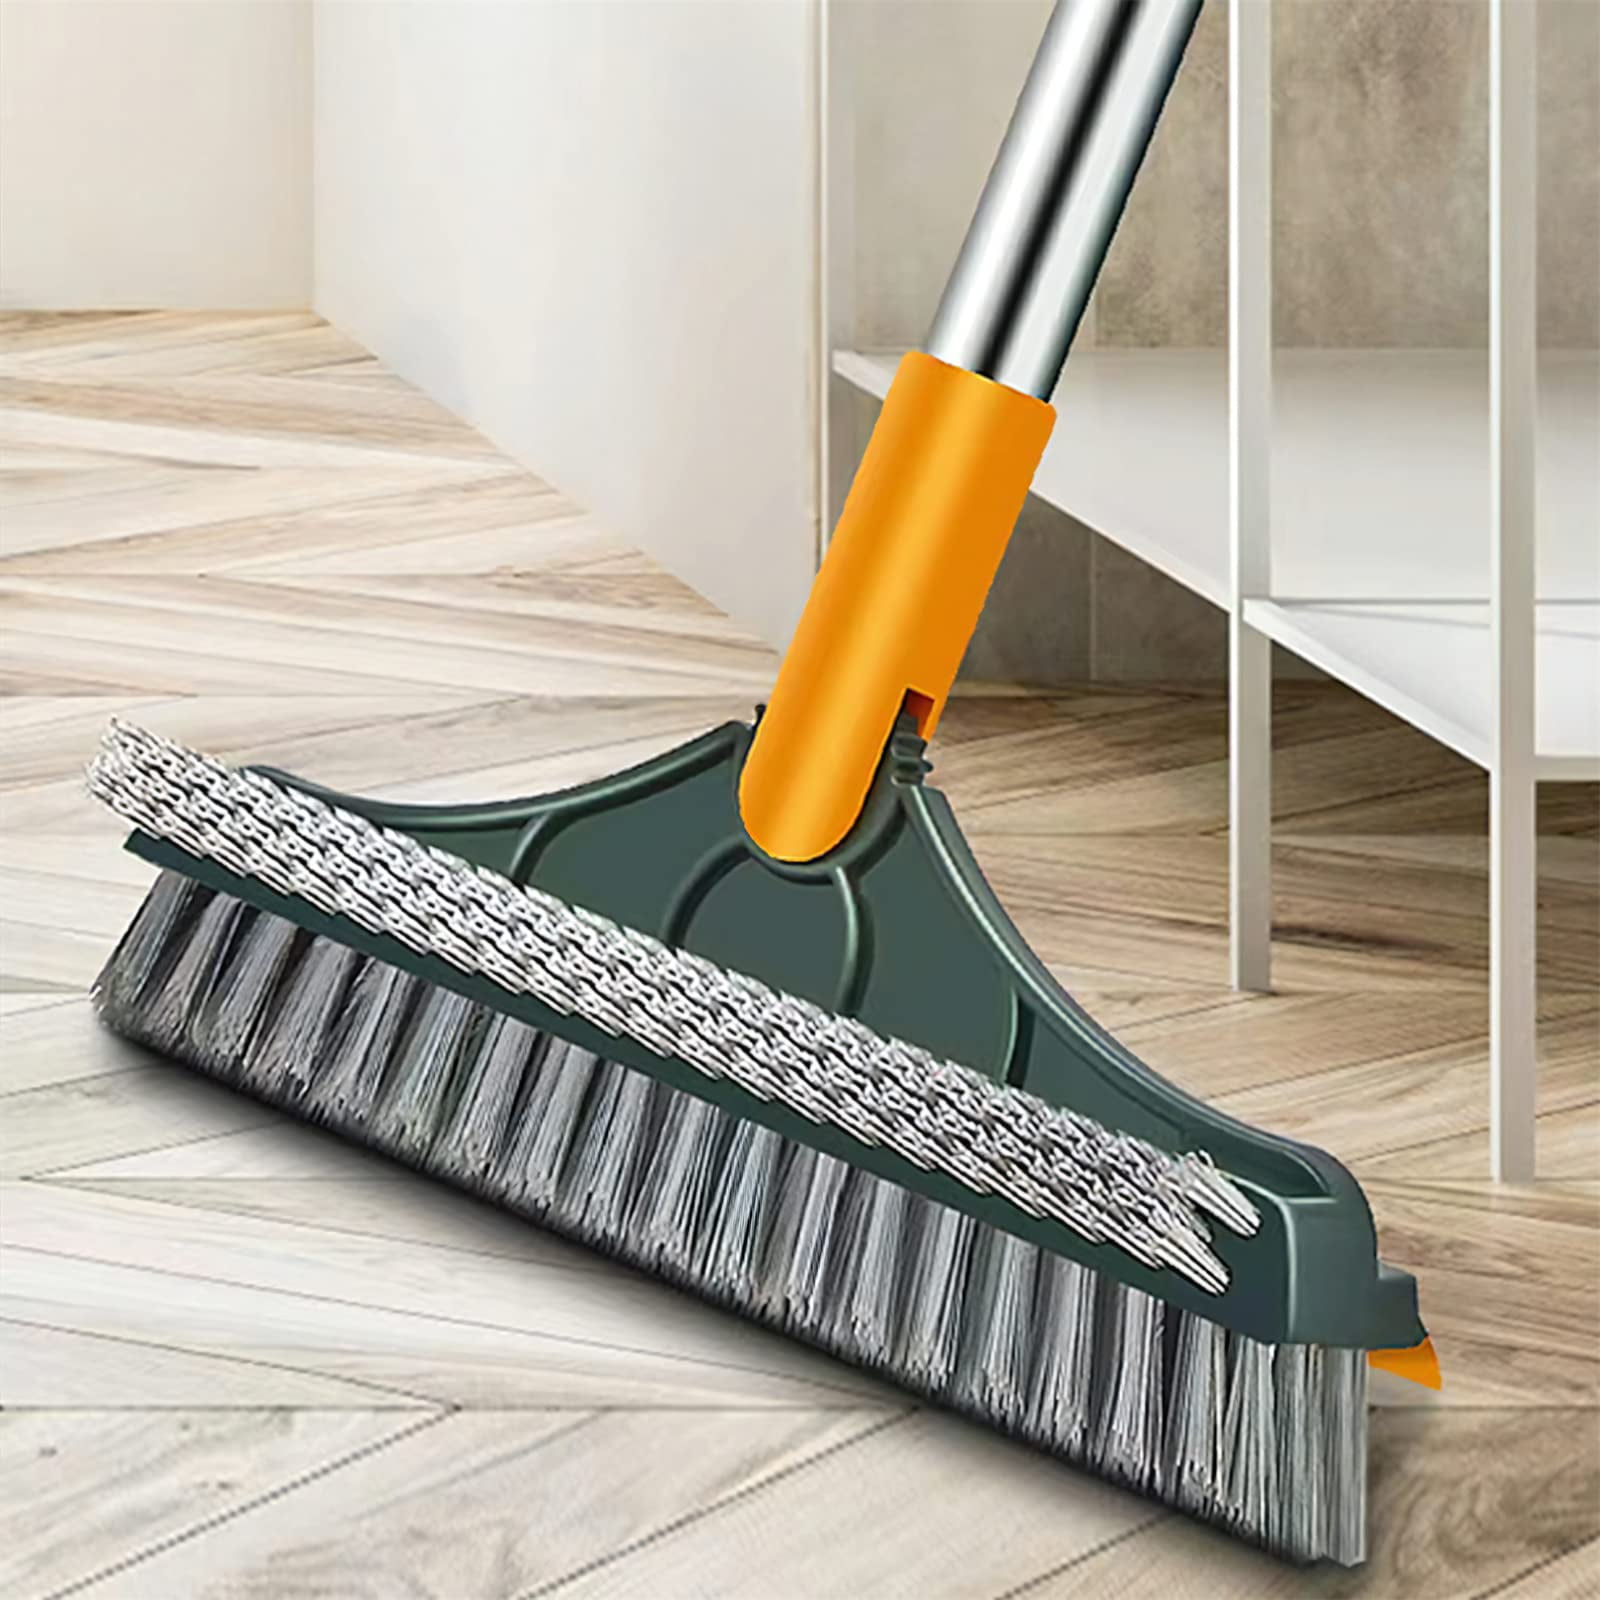 Floor Scrub Brush With Squeegee, Floor Brush Scrubber With Long